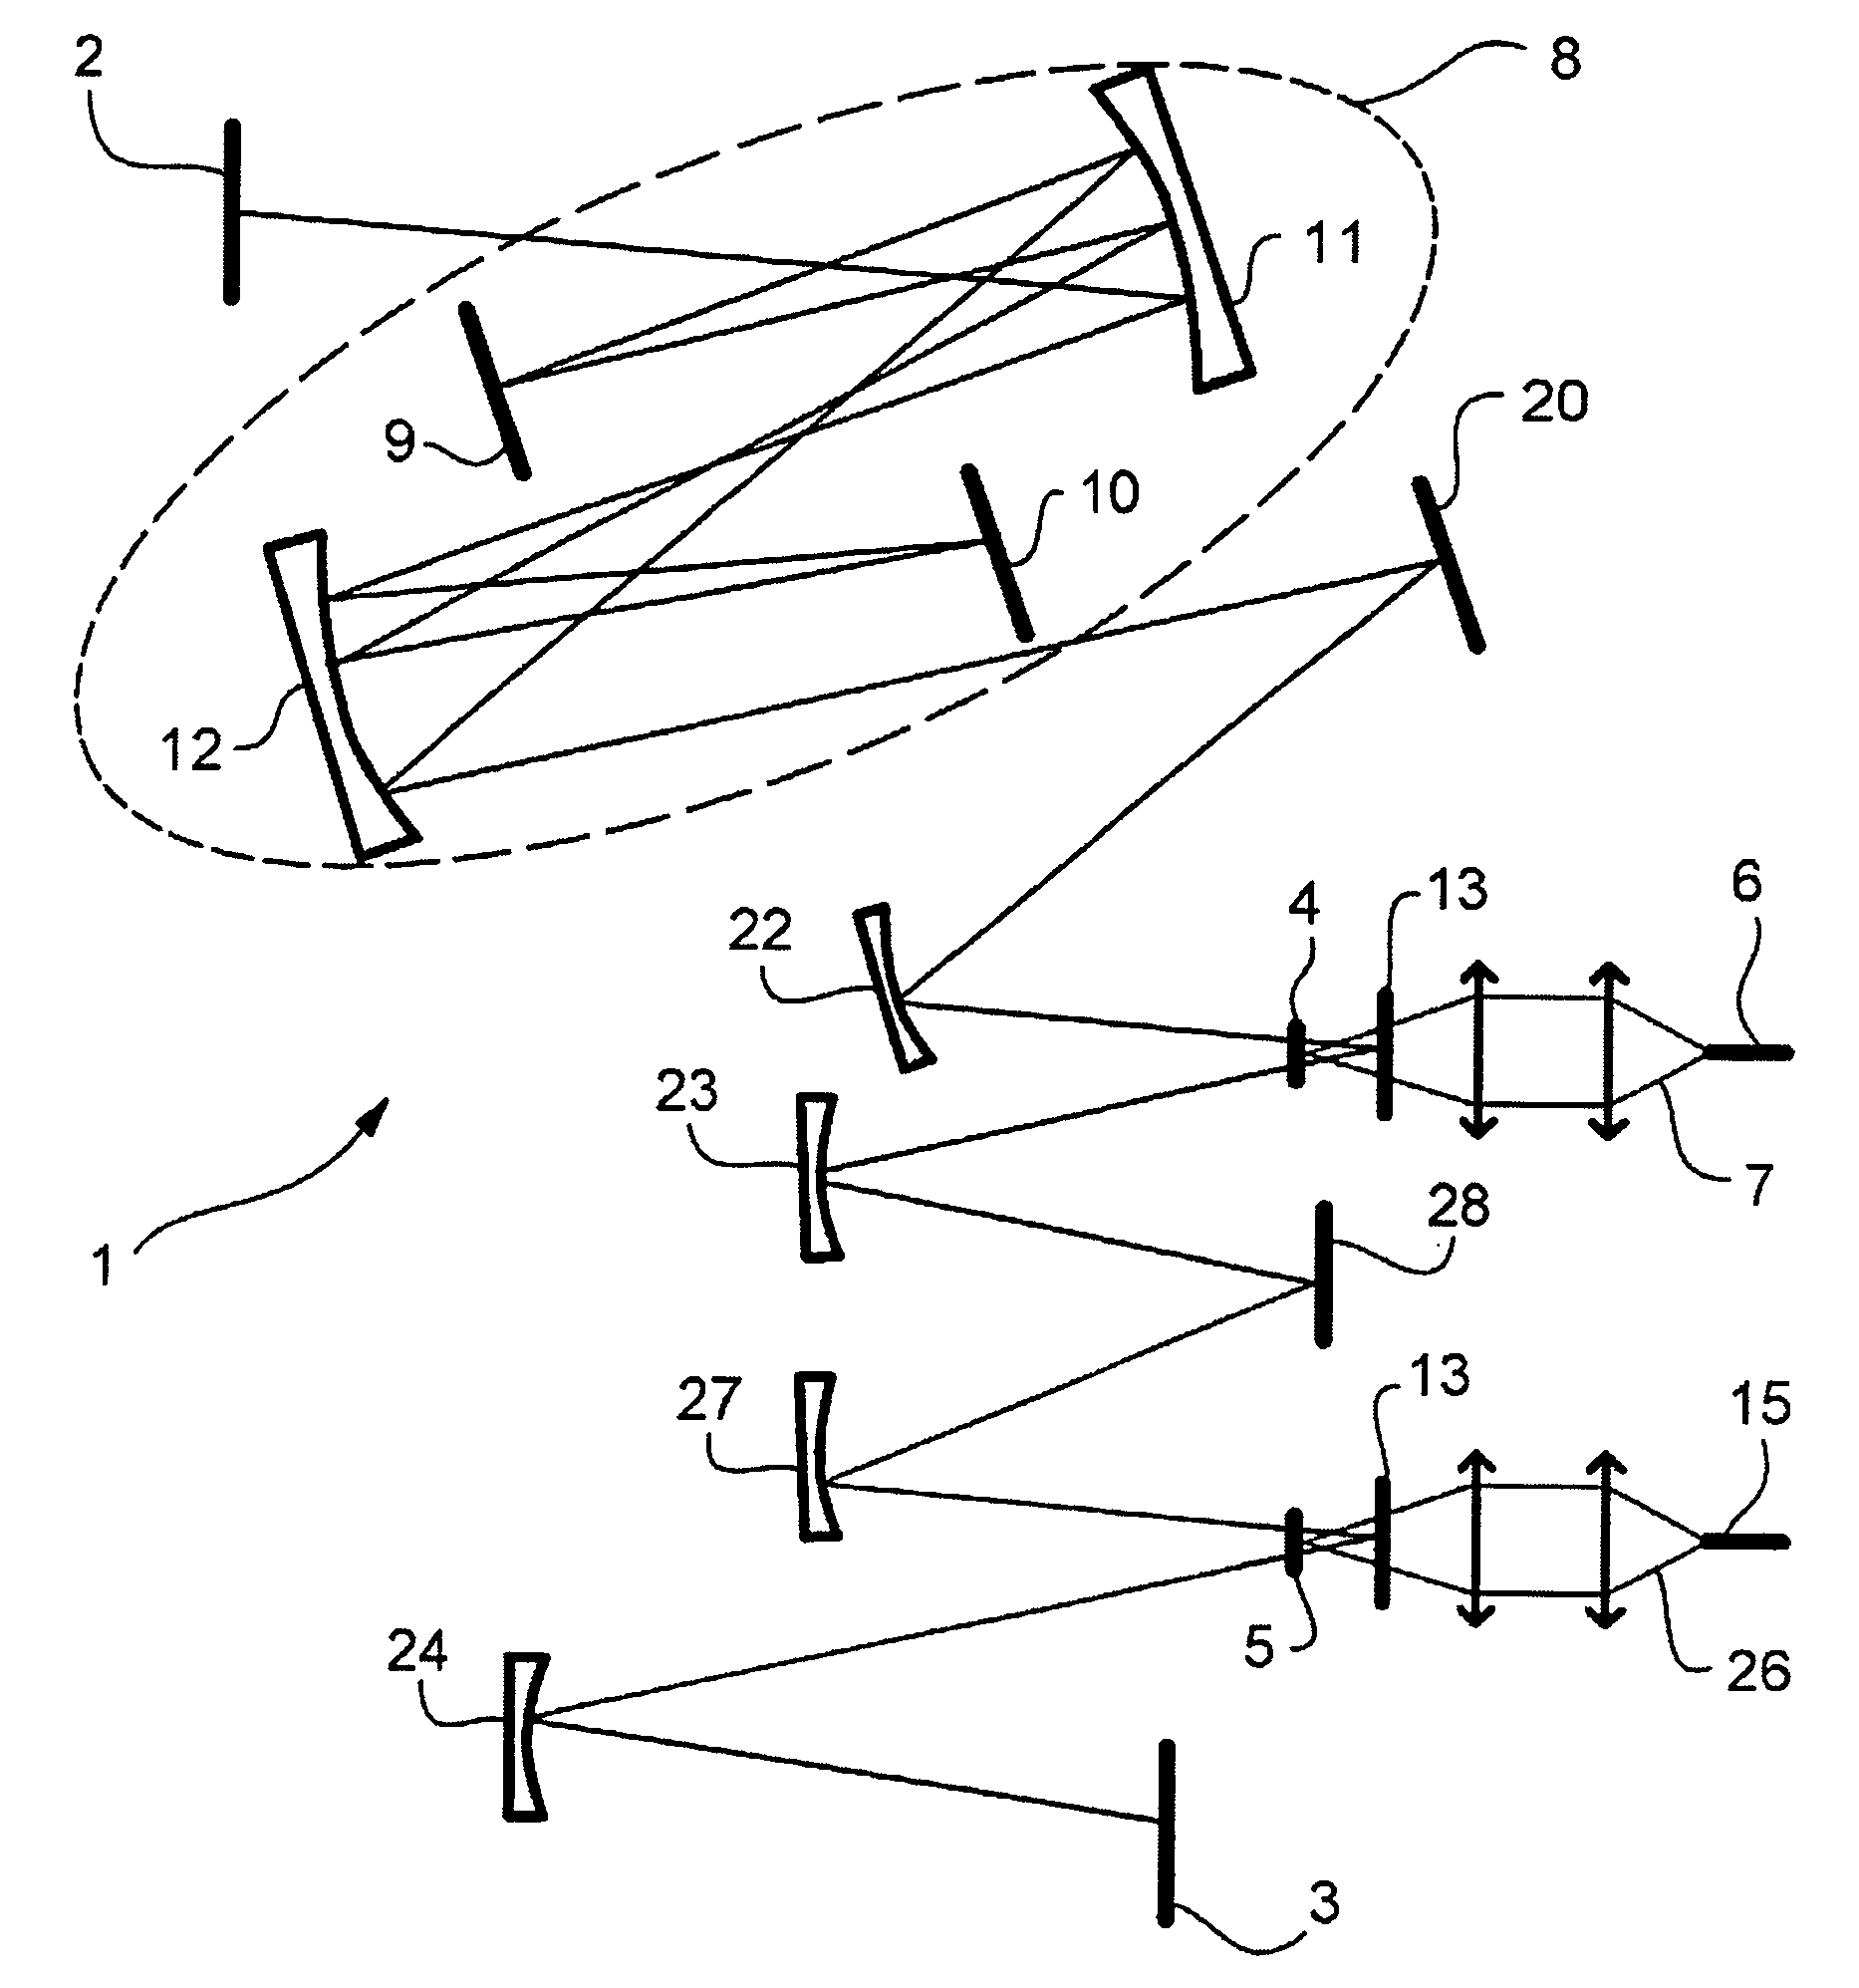 Ultra-short laser source with rare earth ions and stable pulse train and device for lengthening a laser cavity